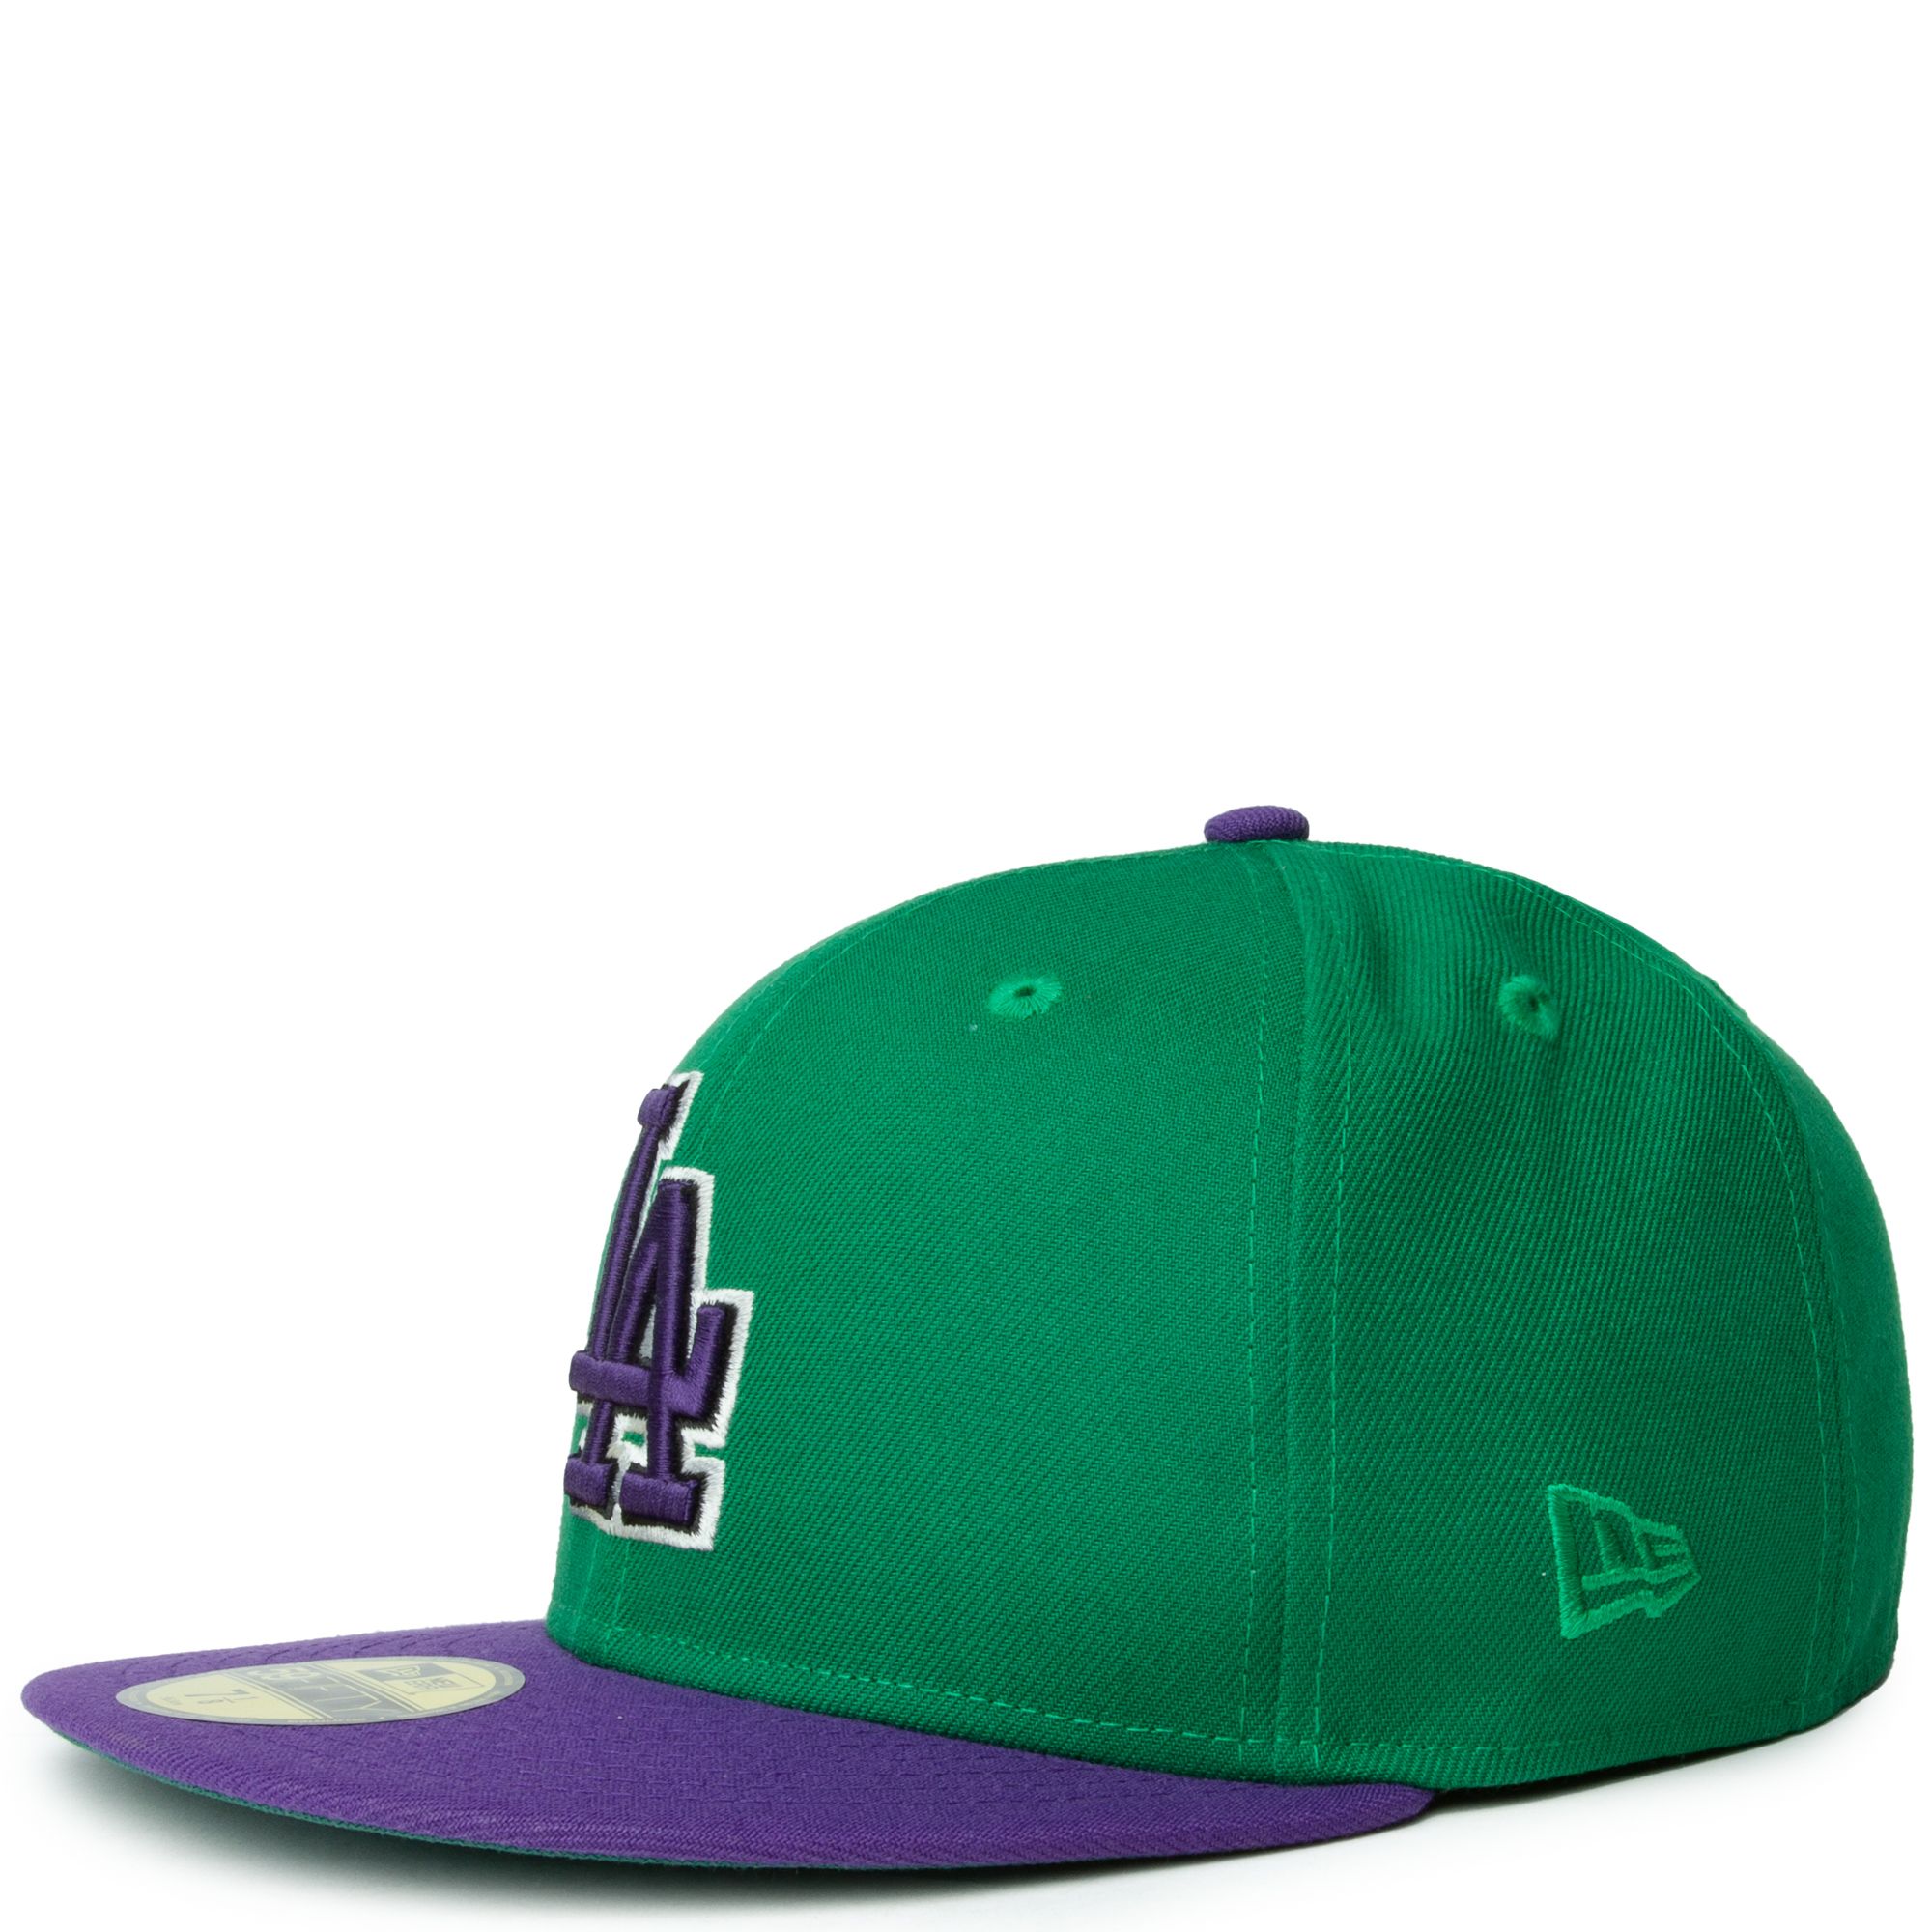 Exclusive SOLD OUT New Era 59fifty LA Dodgers Purple Pink UV Under Brim  Fitted Not Hat Club •SOLD OUT EXCLUSIVE LIMITED RELEASE •Size 7 & for Sale  in Whittier, CA - OfferUp